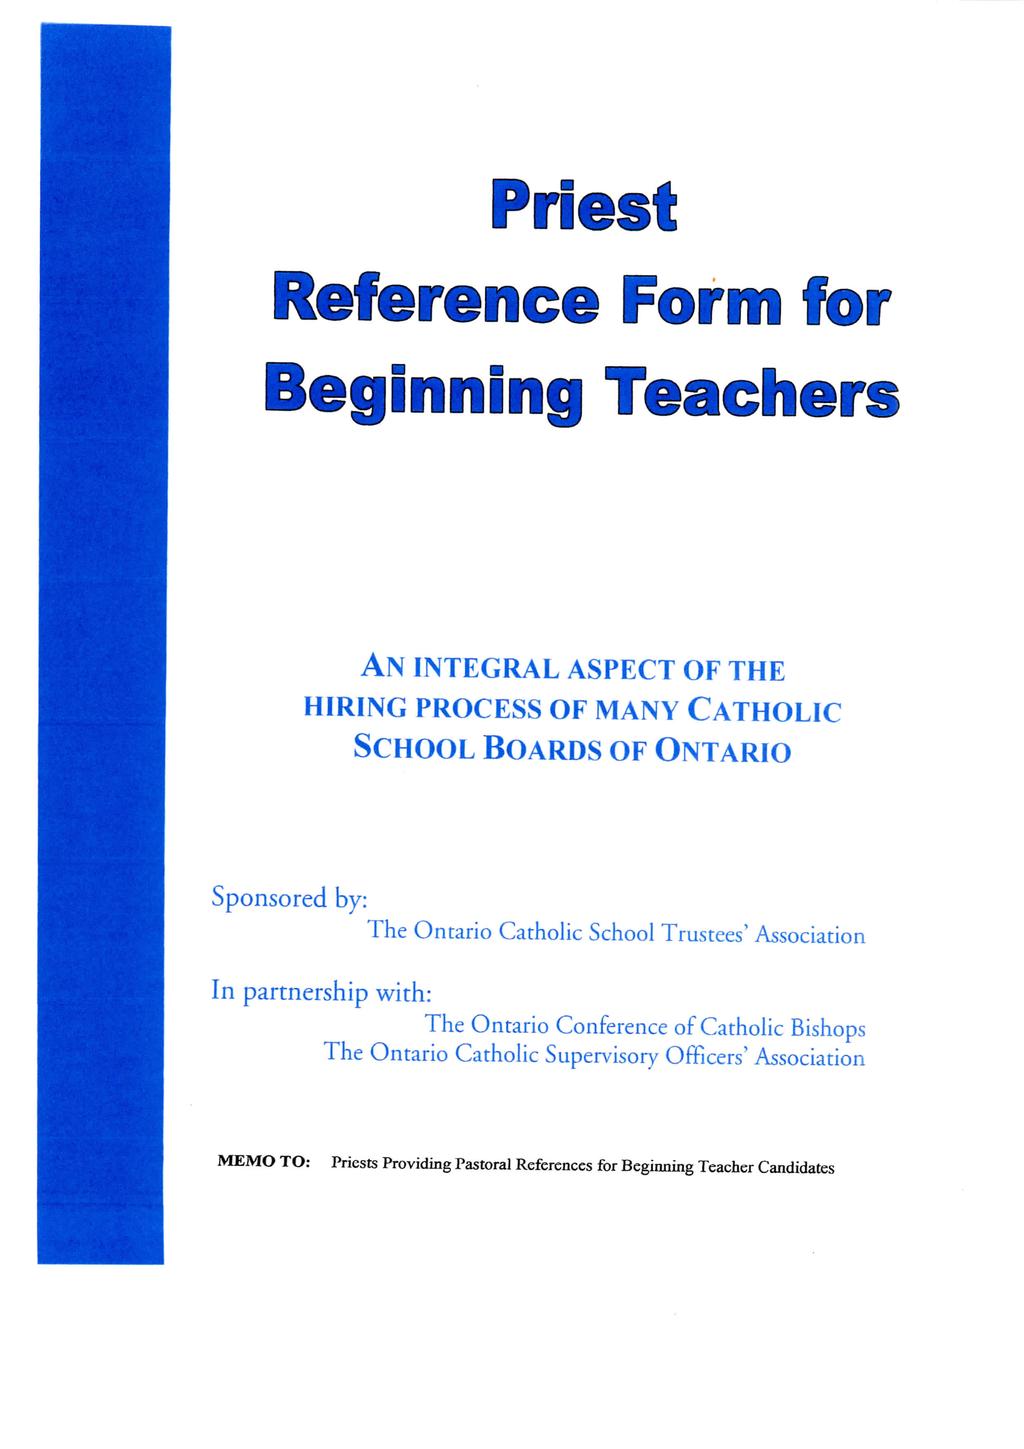 Priest Reference Form for Beginning Teachers AN INTEGRAL ASPECT OF THE HIRING PROCESS OF MANY CATHOLIC SCHOOL BOARDS OF ONTARIO Sponsored by: The Ontario Catholic School Trustees' Association In